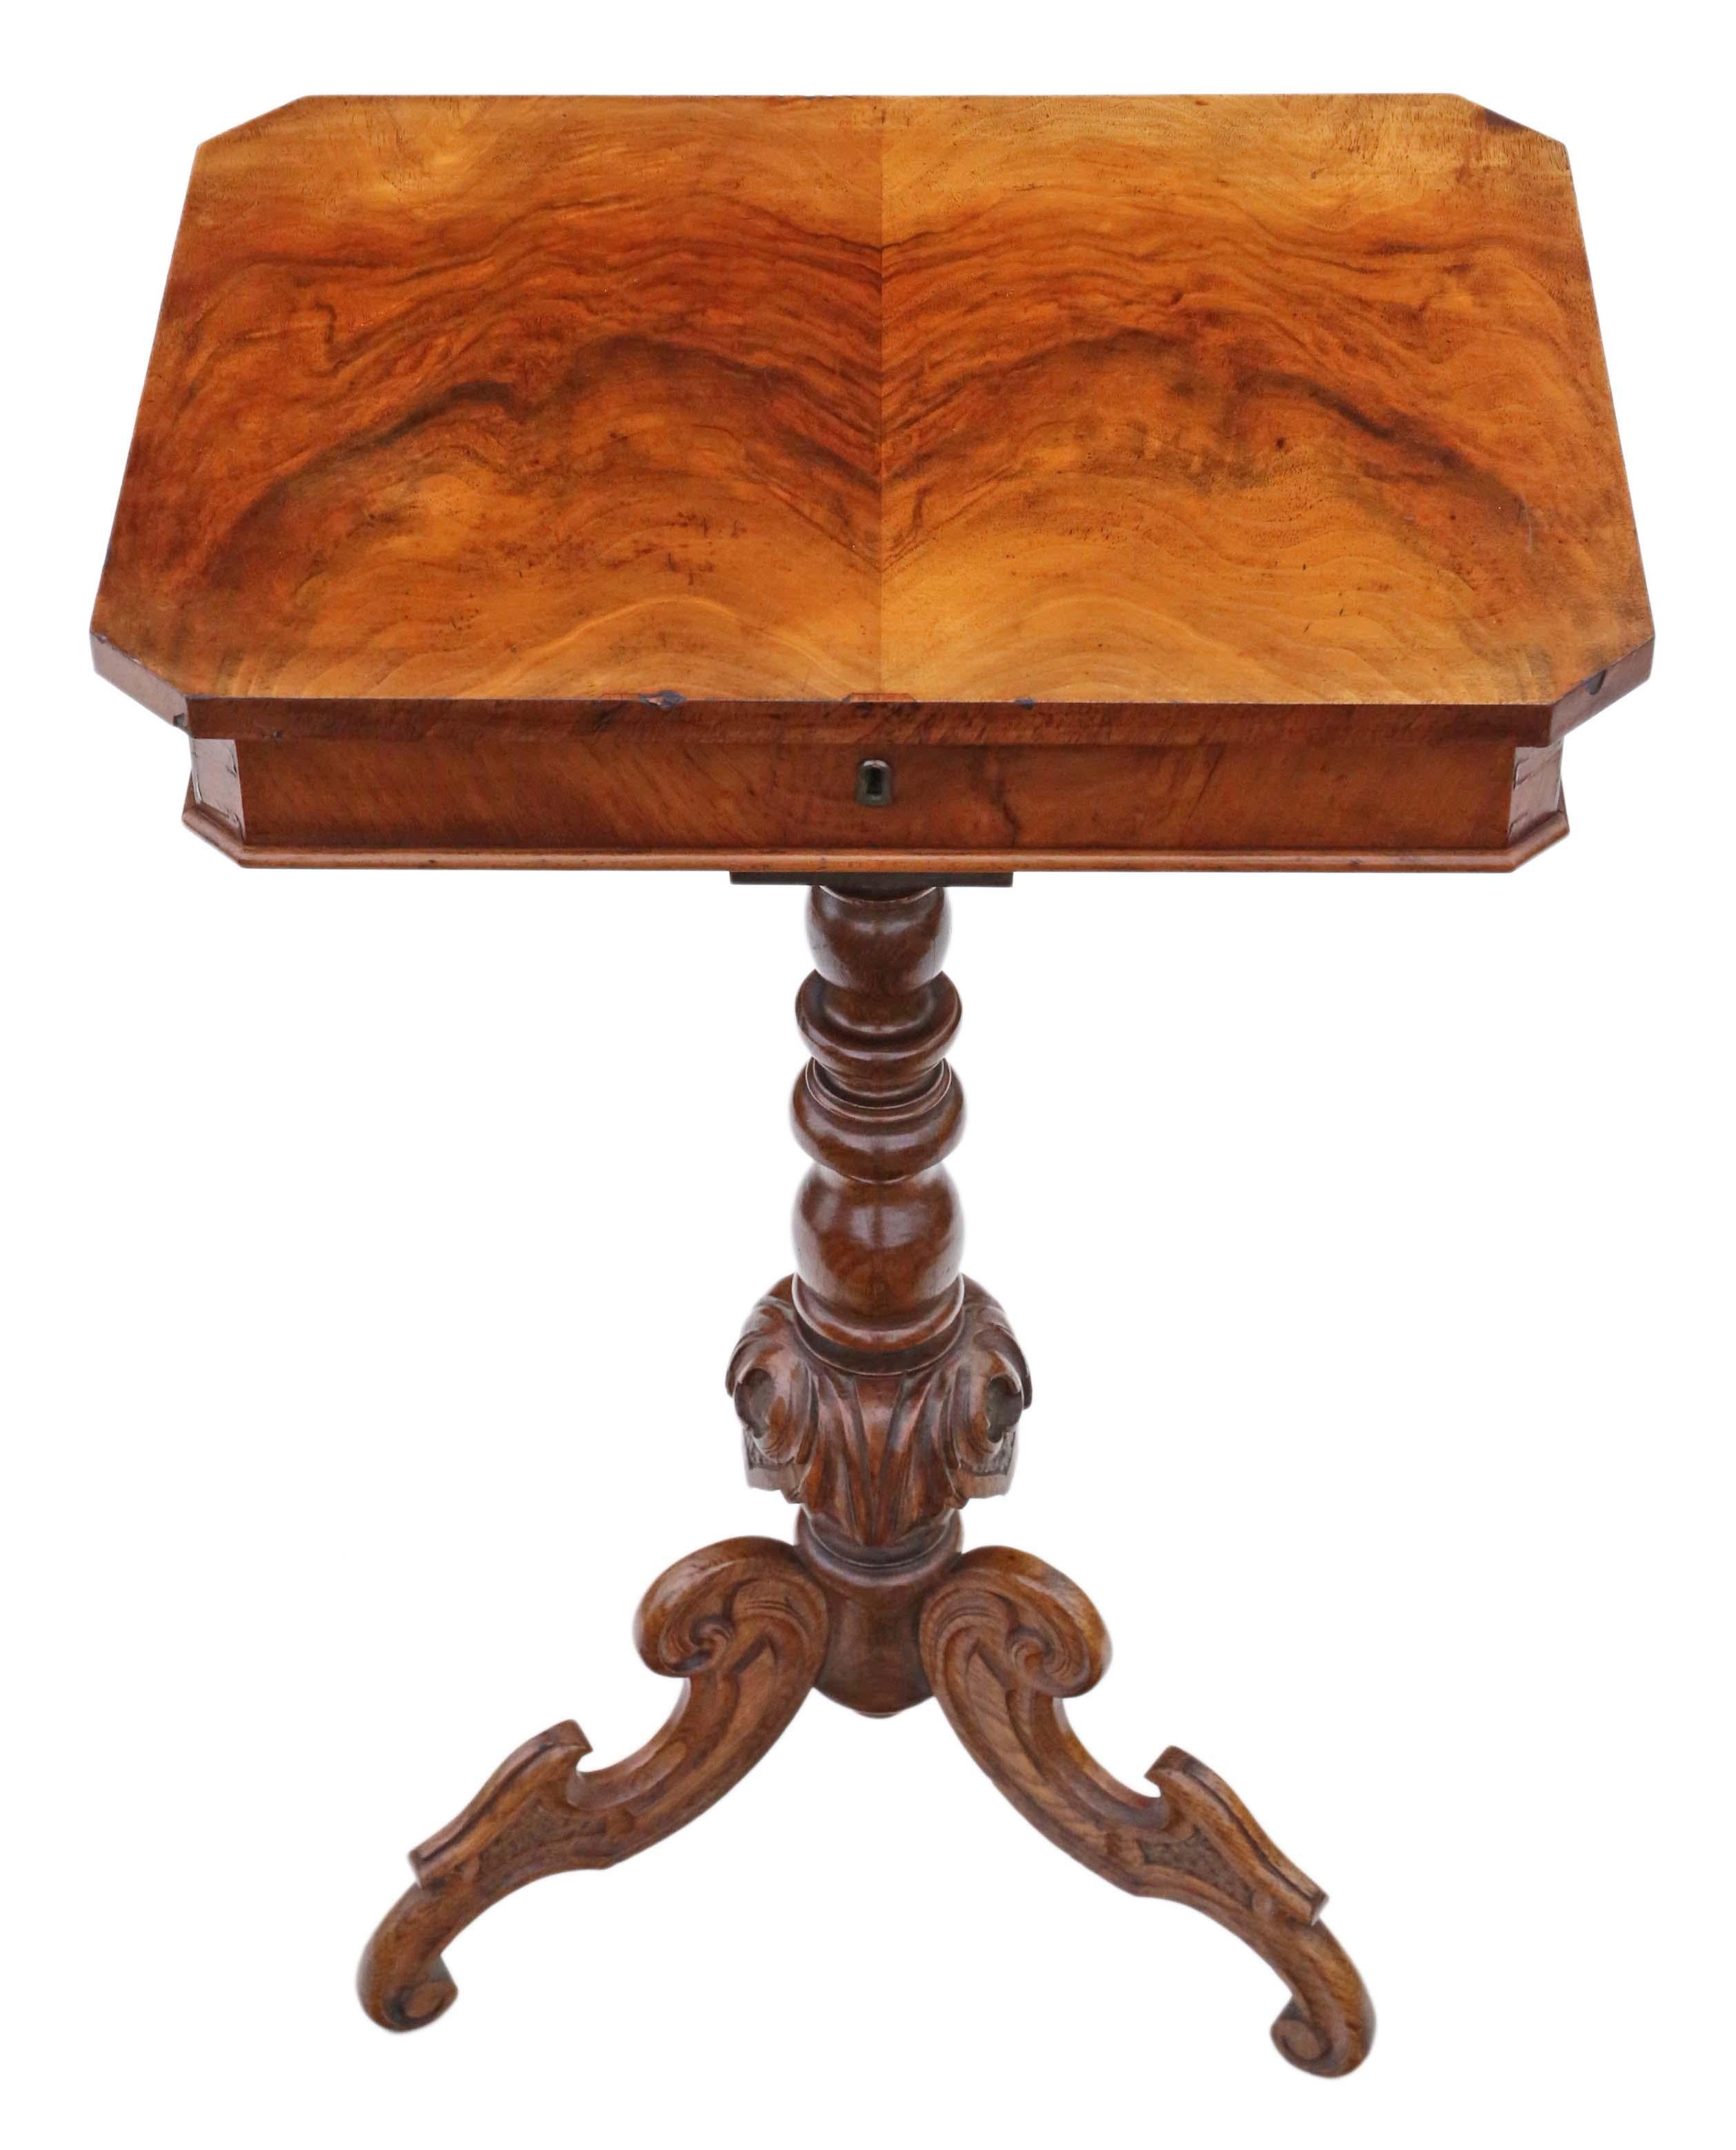 Antique Victorian circa 1860 burr walnut work side sewing table box

This is a lovely item, that is full of age, charm and character.

An attractive, rare and versatile piece with so many different uses.

Solid, with no loose joints and no